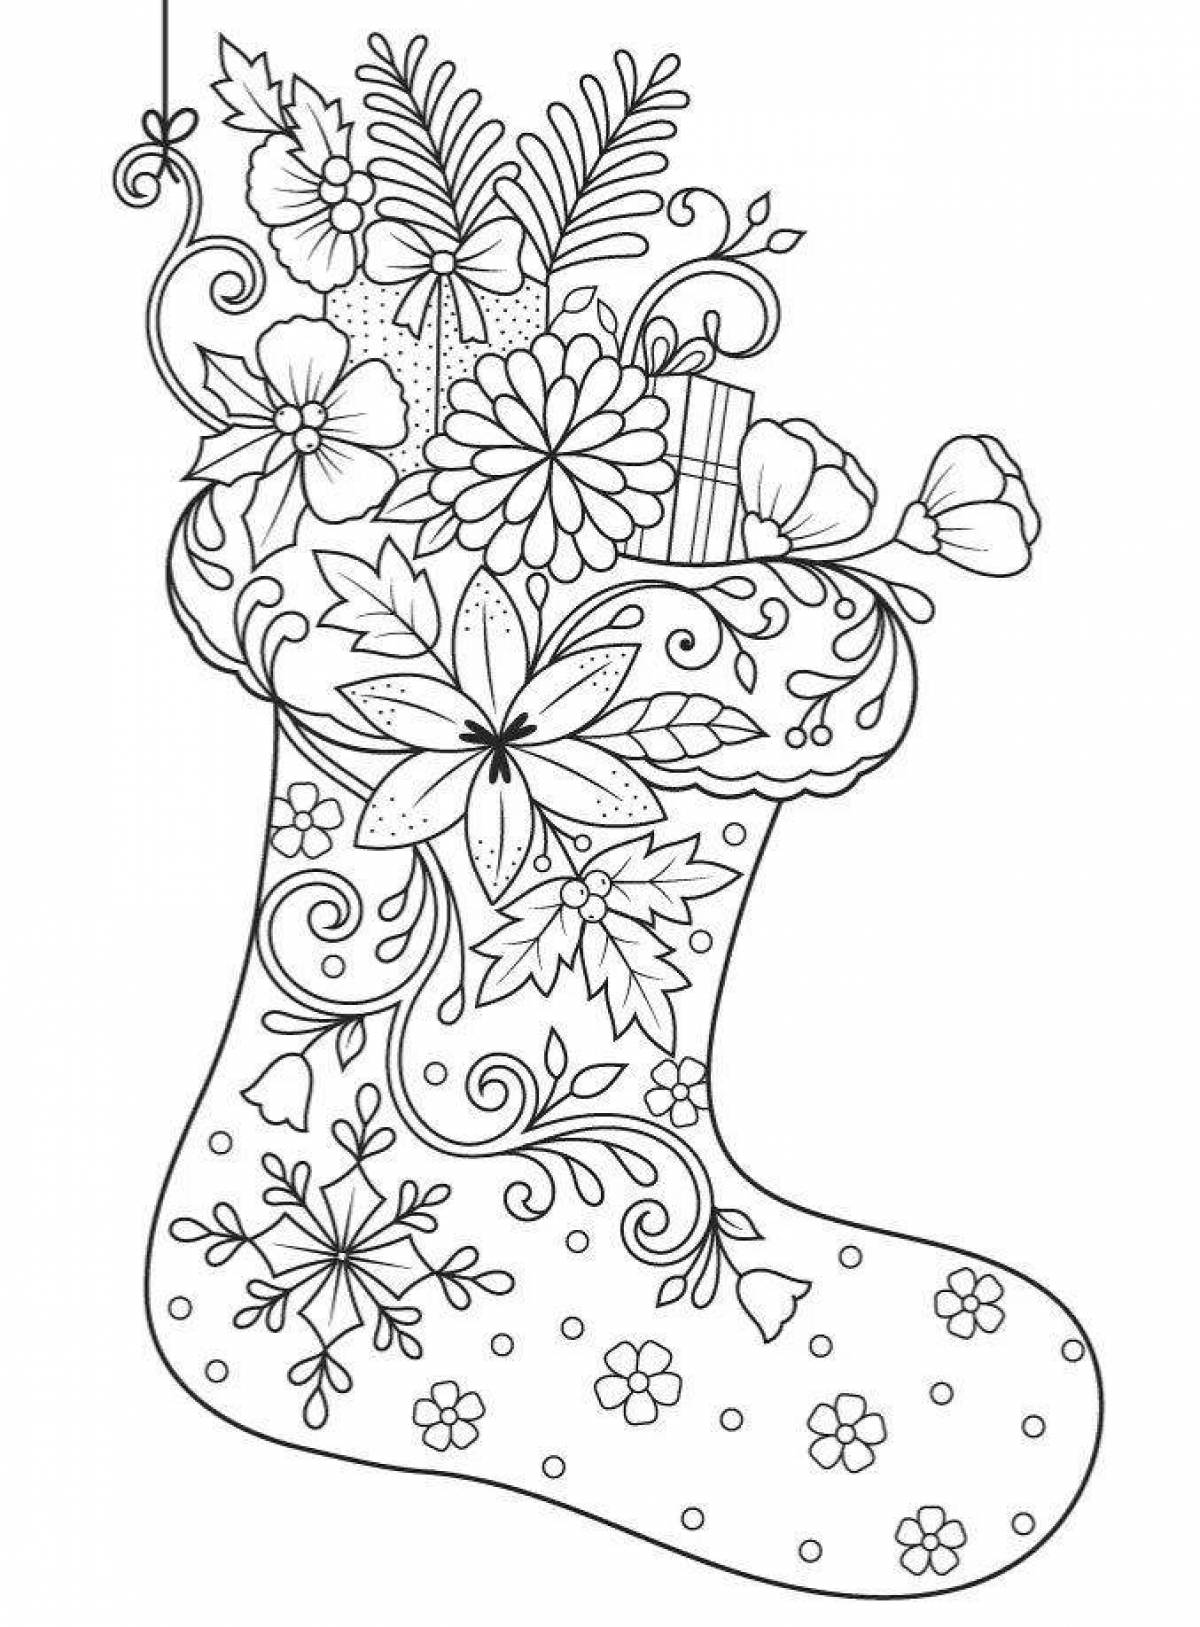 Coloring book glowing Christmas boot